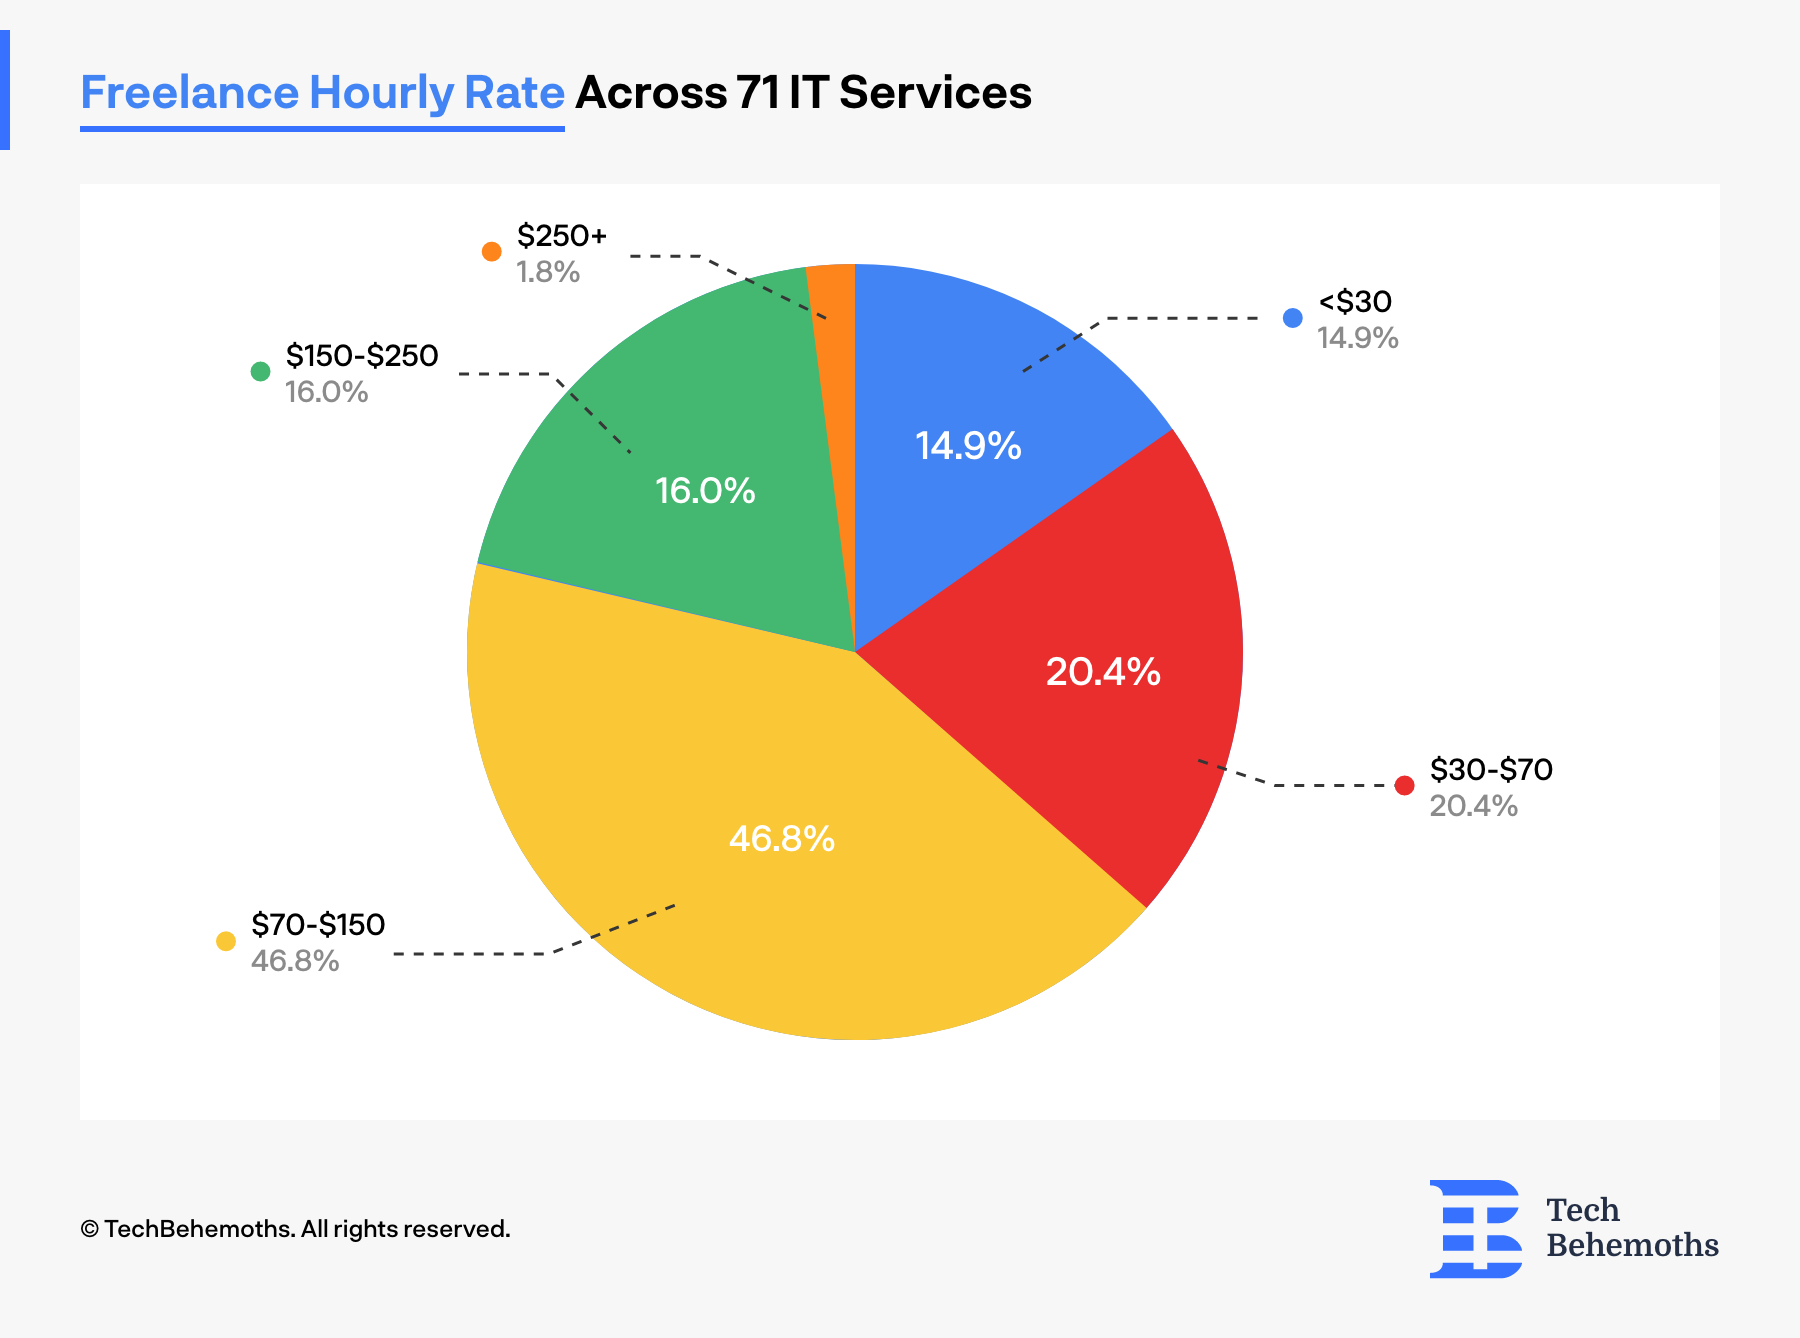 Freelance Hourly Rate Across 71 IT Services